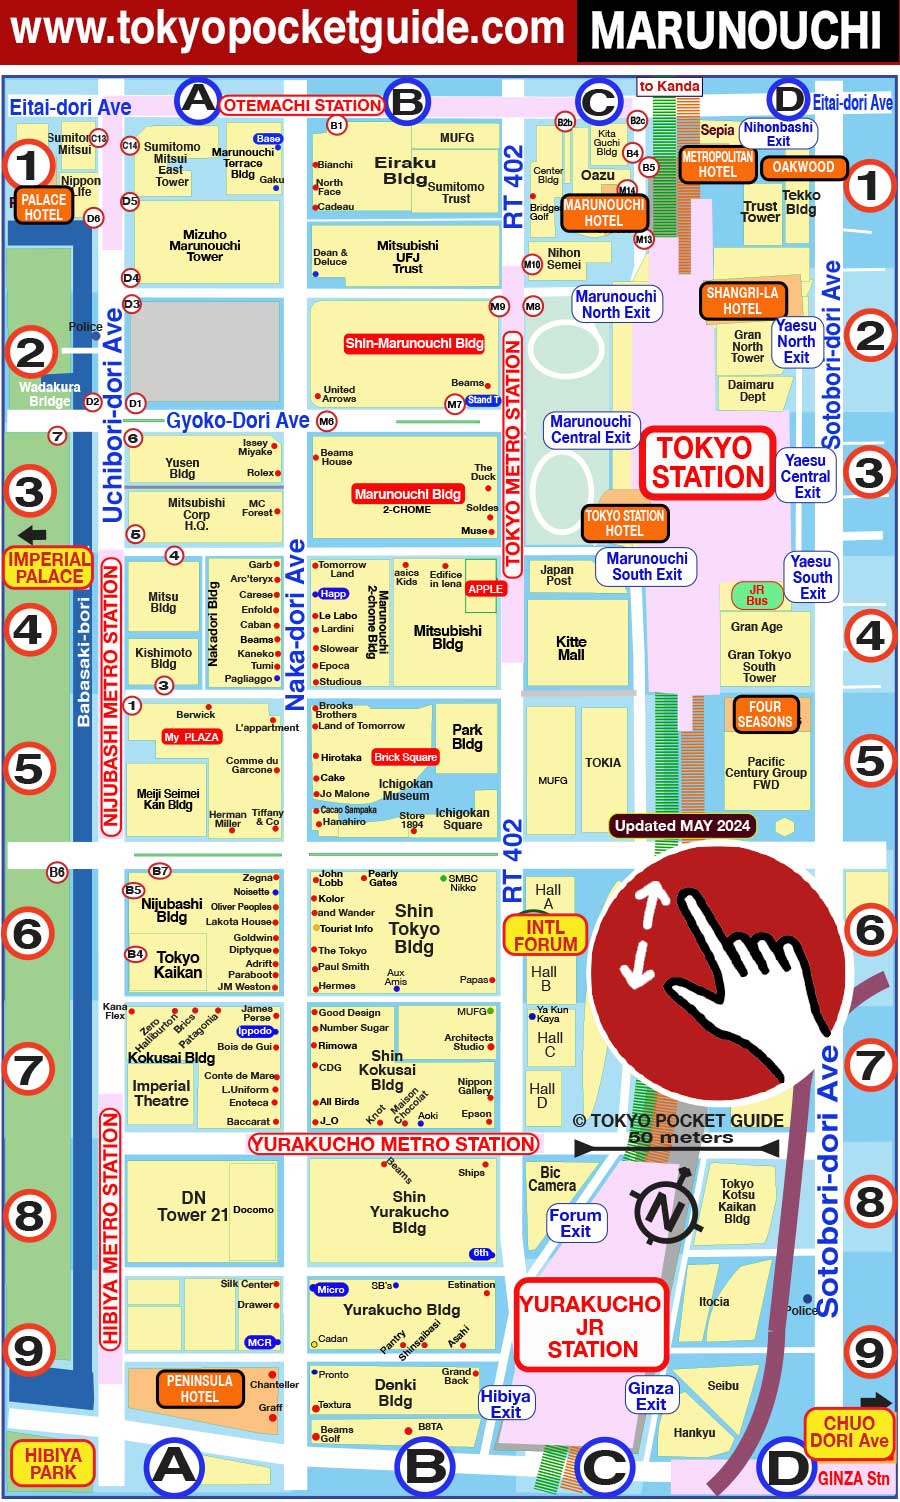 Tokyo Pocket Guide Tokyo Marunouchi Map In English For Shopping And Stores